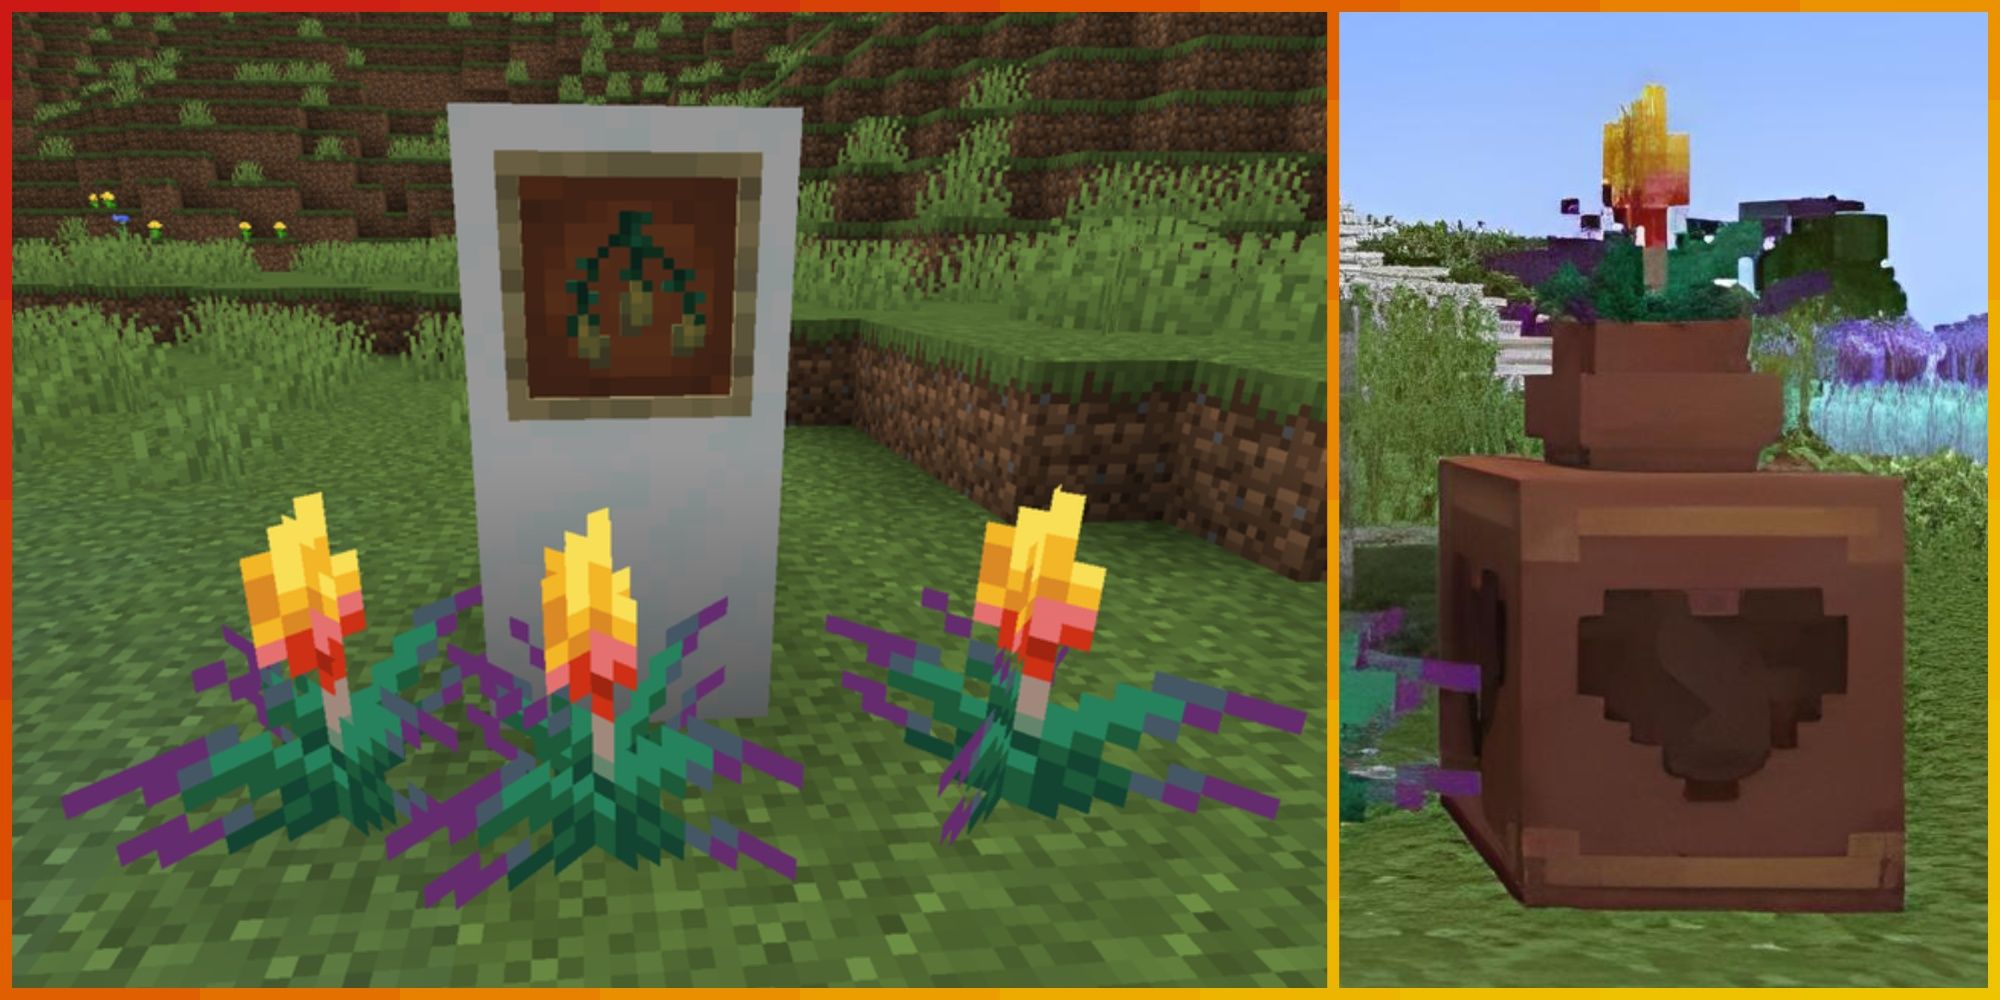 a trio of torchflowers in front of a seed next to a torchflower in a decorative pot